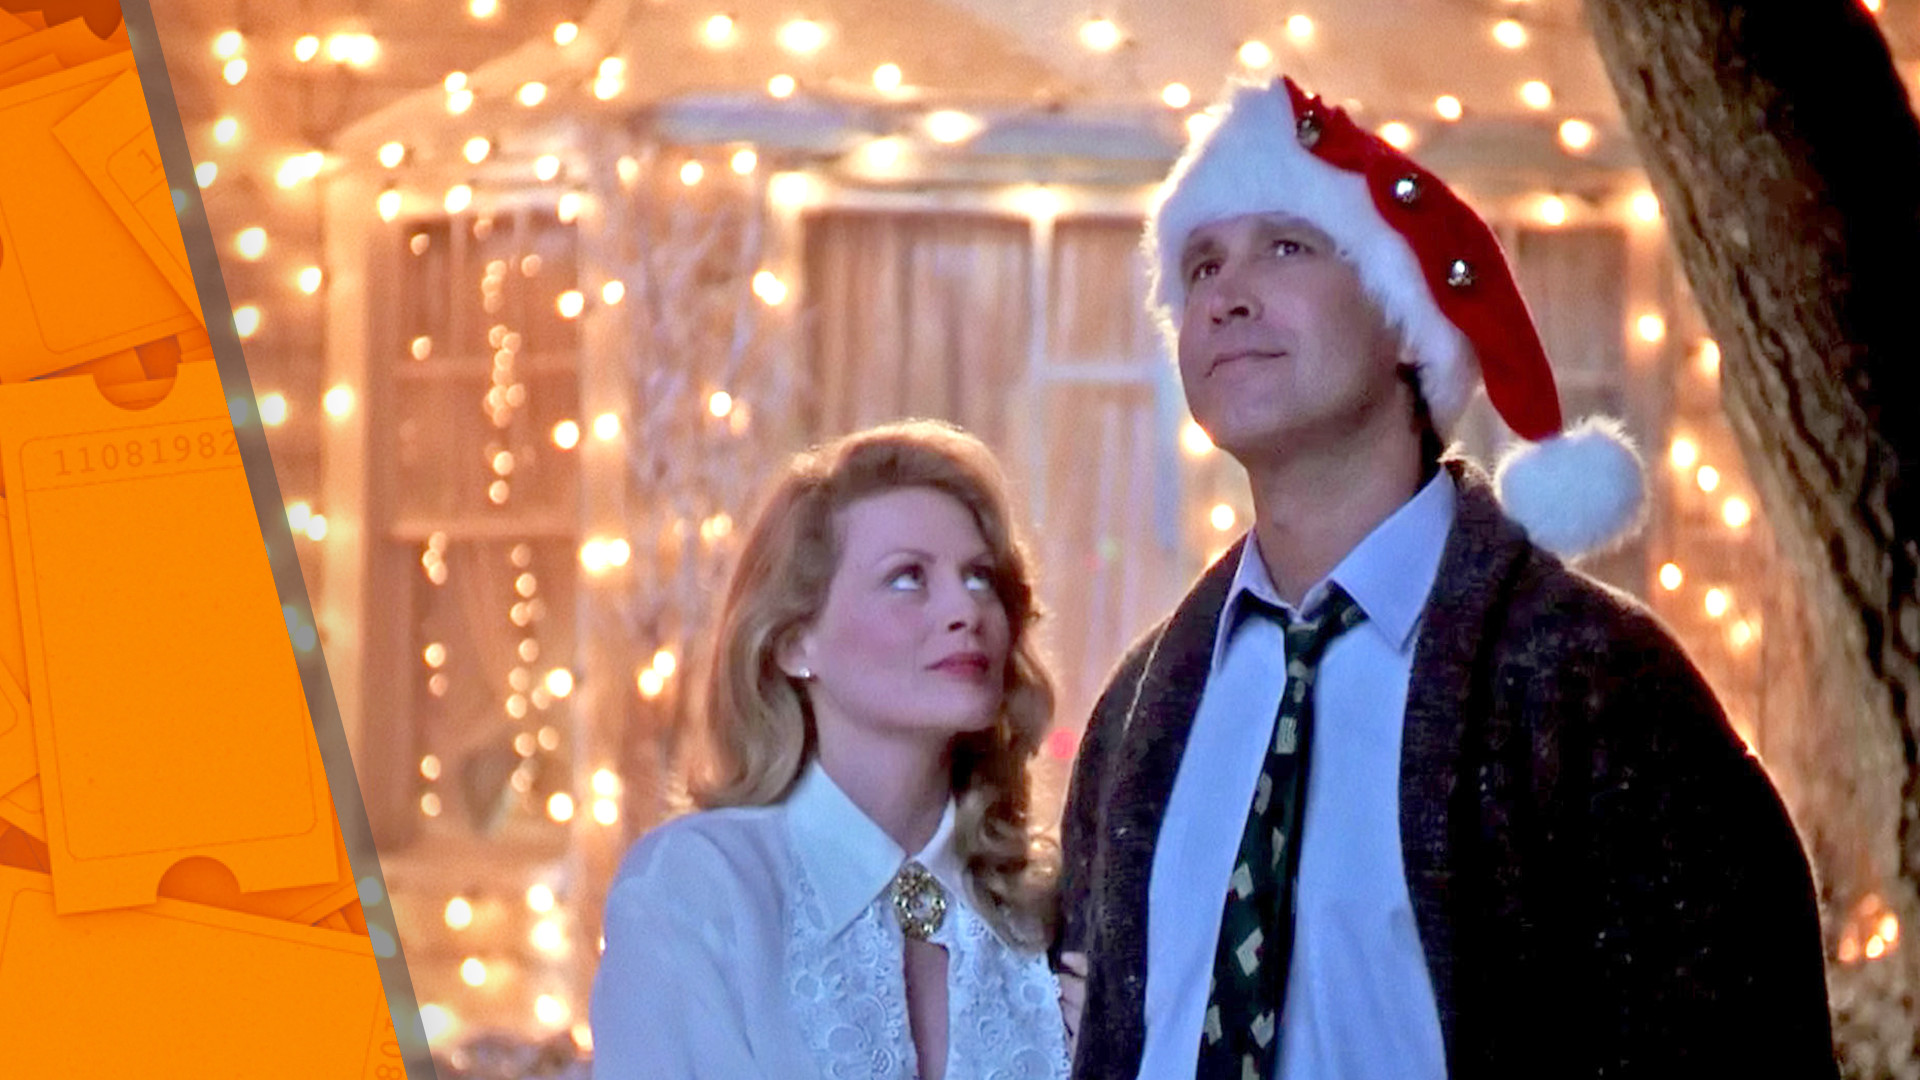 1920x1080 National Lampoon's Christmas Vacation (1989) Cast and Crew - Cast Photos  and Info - Fandango